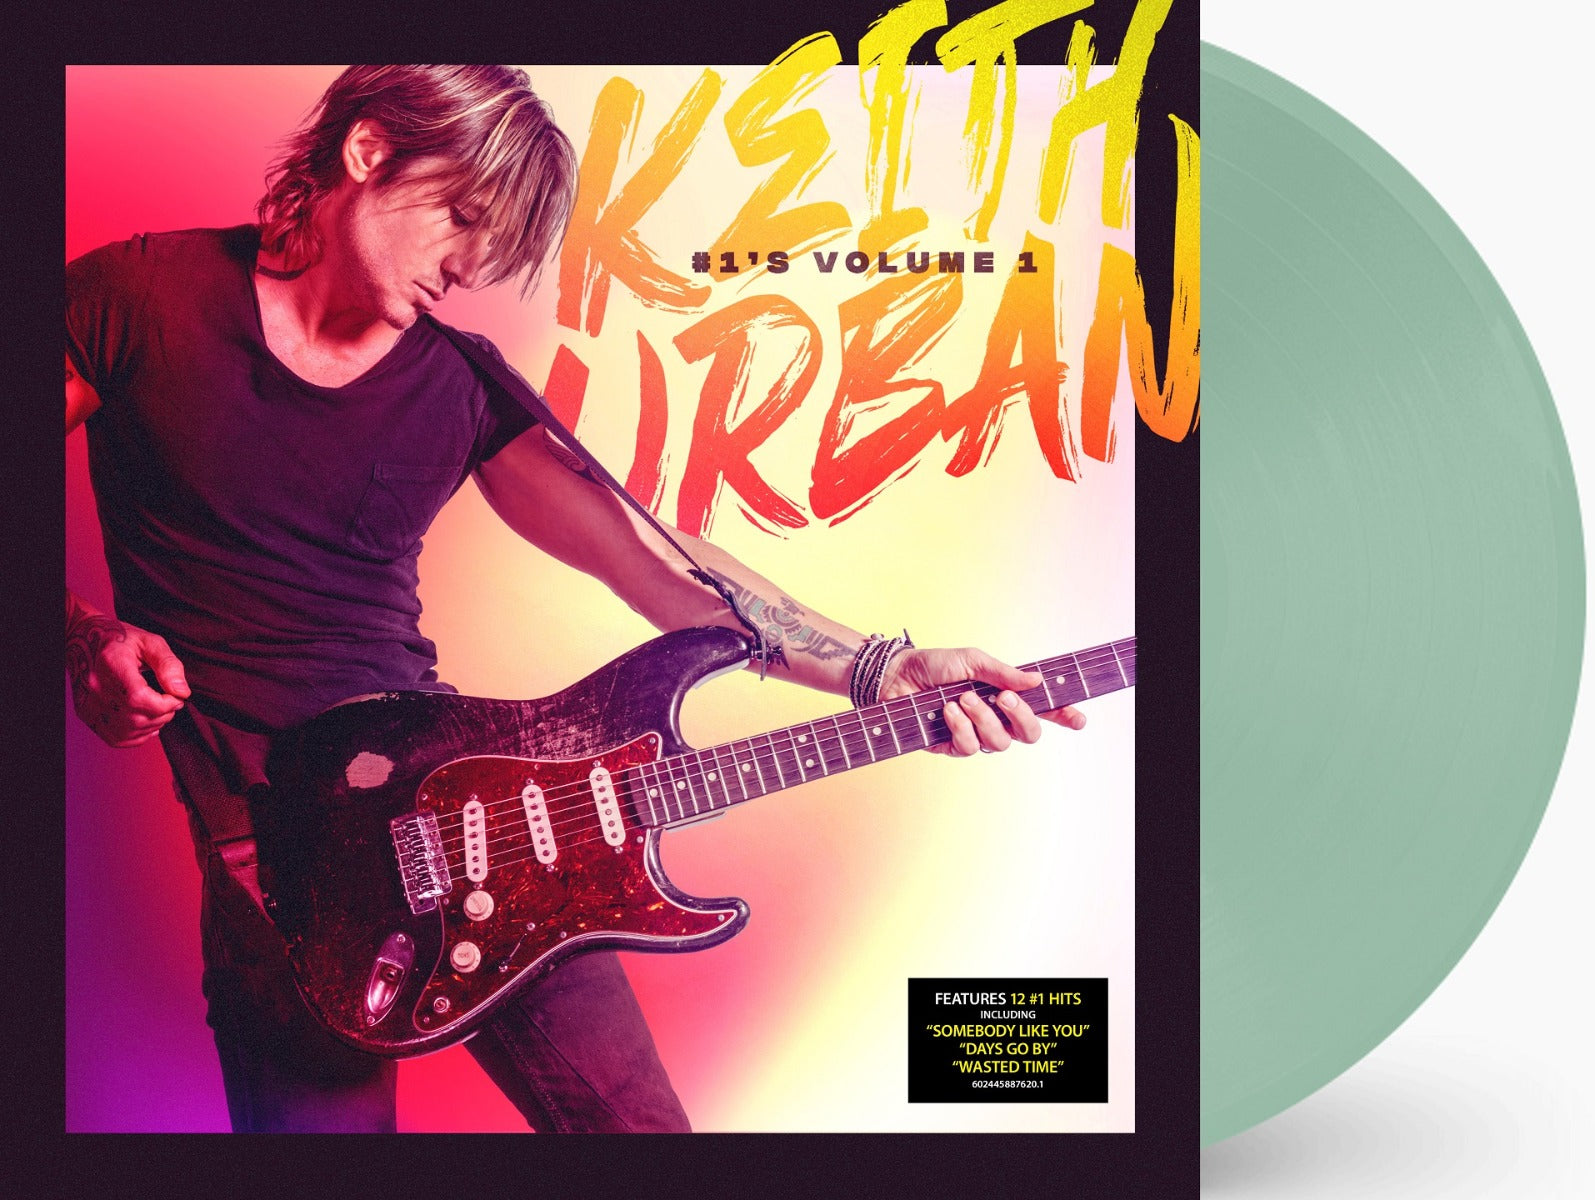 Keith Urban | Keith Urban - #1's Volume 1 (Limited Edition, Coke Bottle Green, Clear Vinyl, Poster) | Vinyl